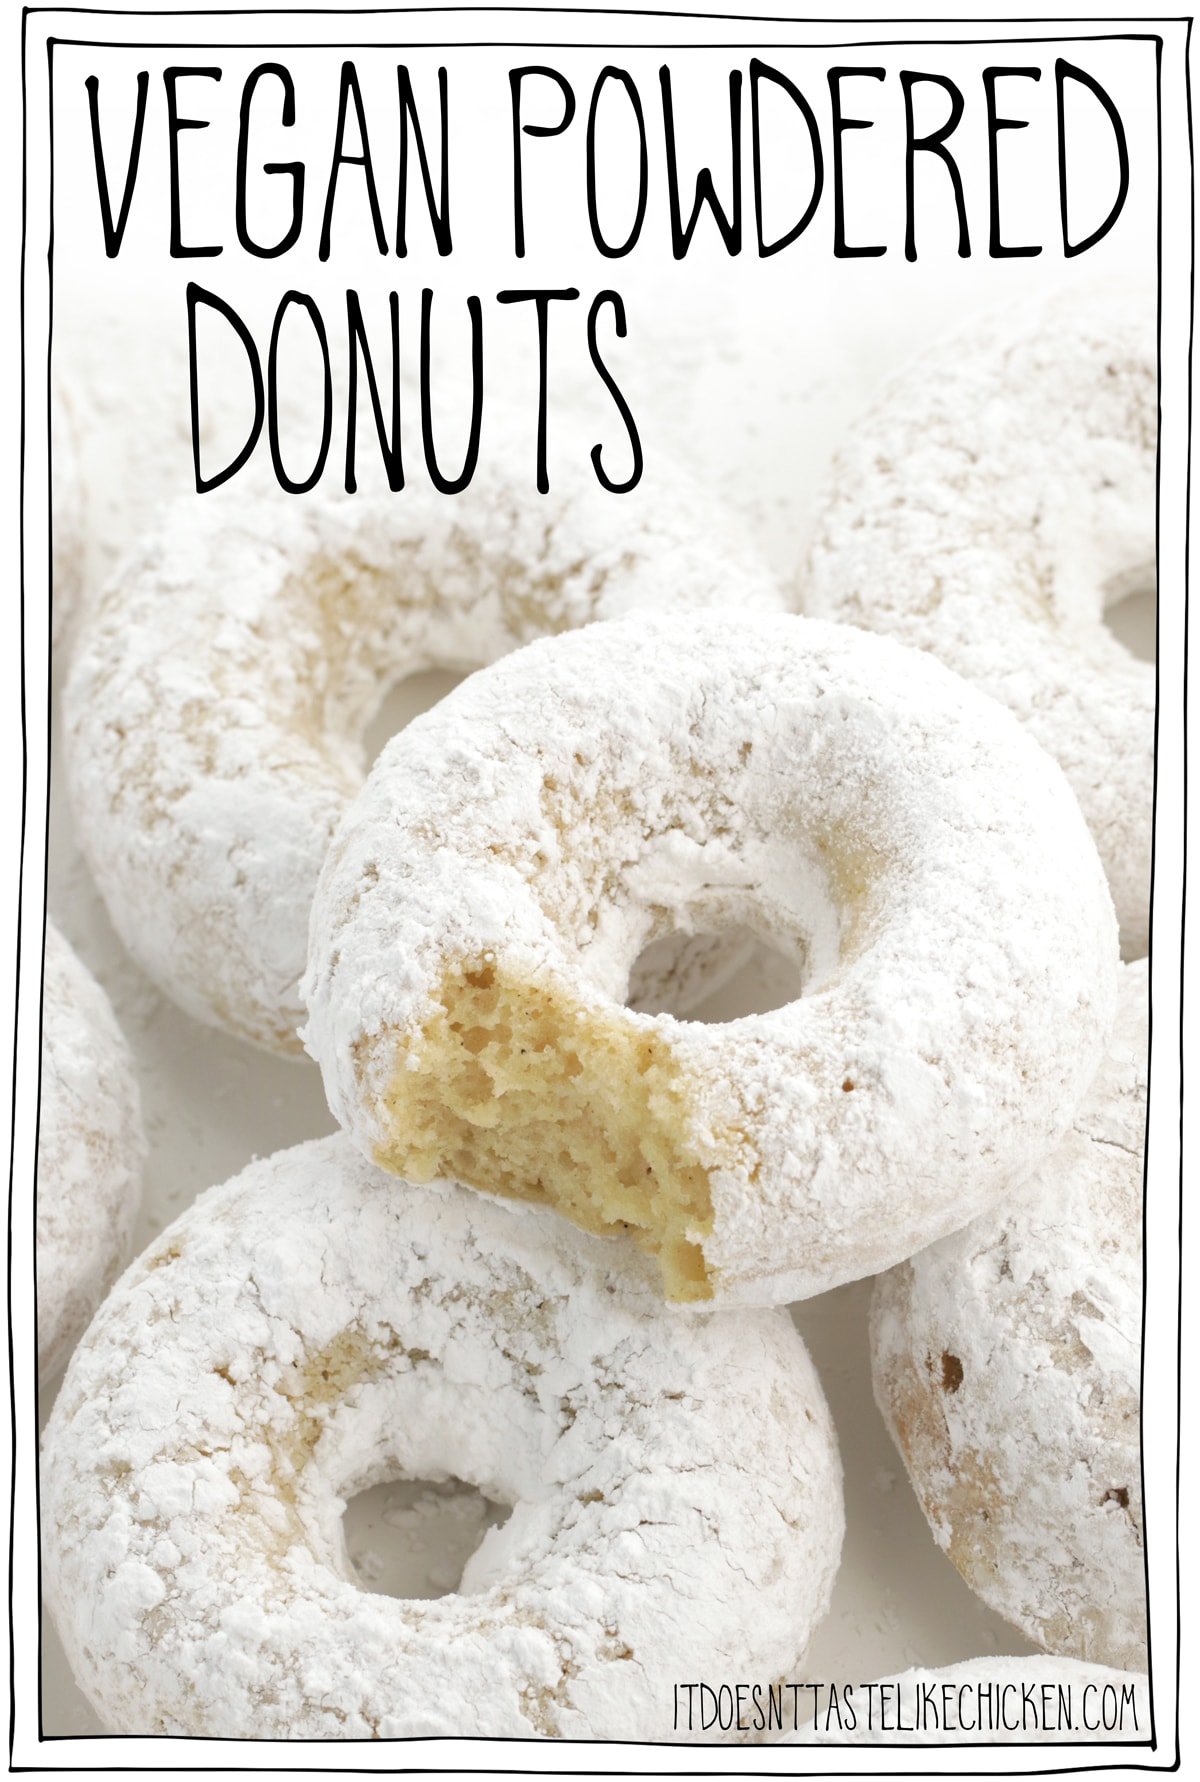 Vegan Powdered Donuts! Homemade donuts are easy to make and taste just like old fashioned white sugar powdered donuts. These baked donuts are the perfect dessert or snack! #itdoesnttastelikechicken #veganrecipes #donuts #veganbaking